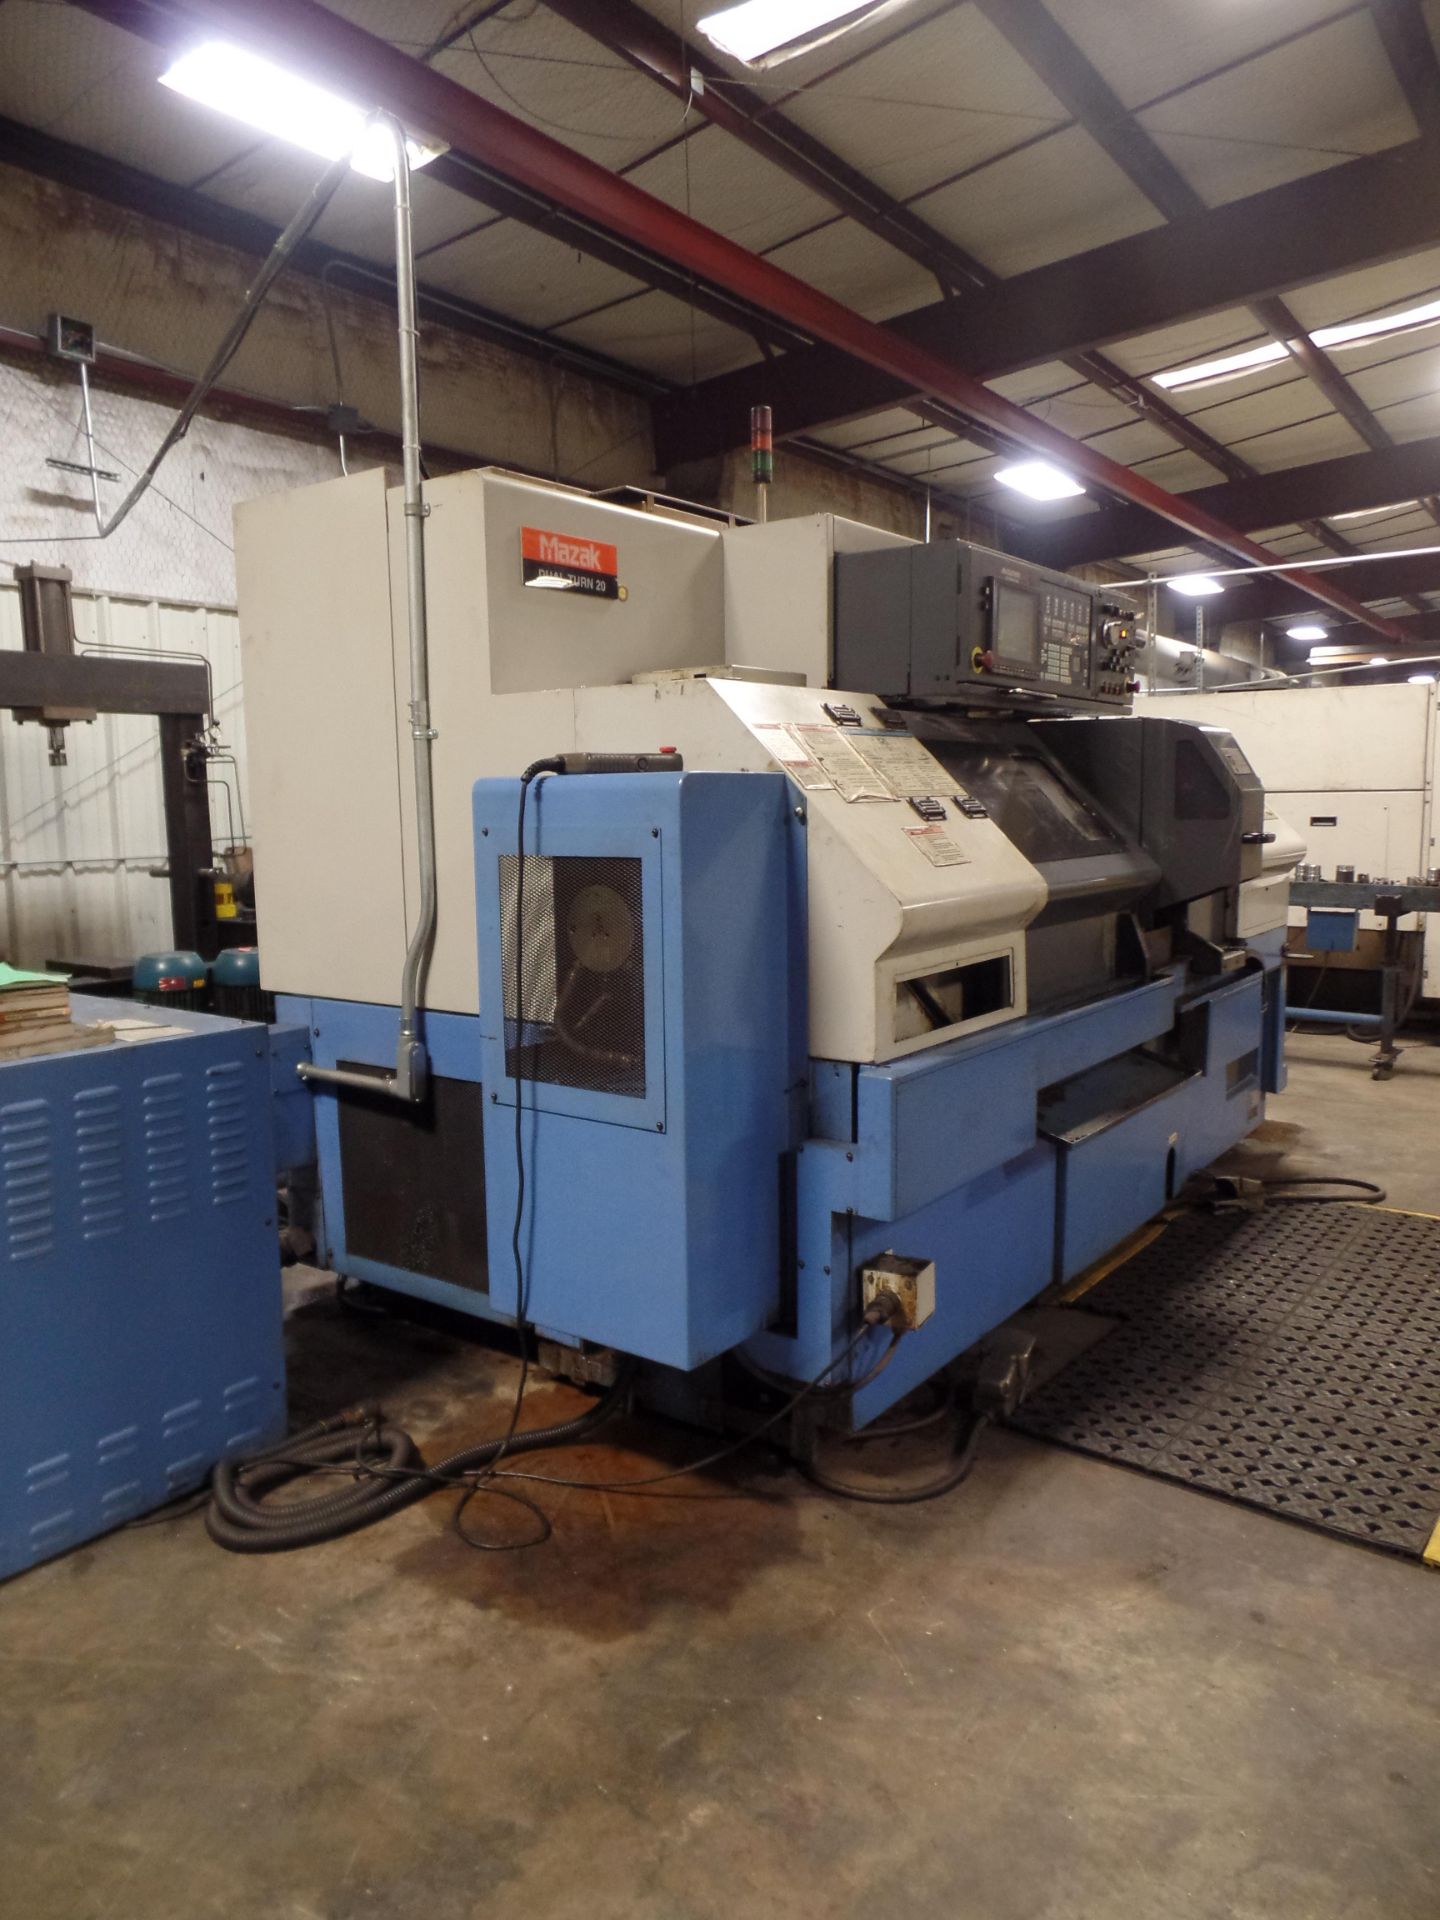 2002 Mazak Dual Turn 20 4 Axis Twin Spindle Twin Turret Opposed CNC Turning Center, rear discharge - Image 4 of 14